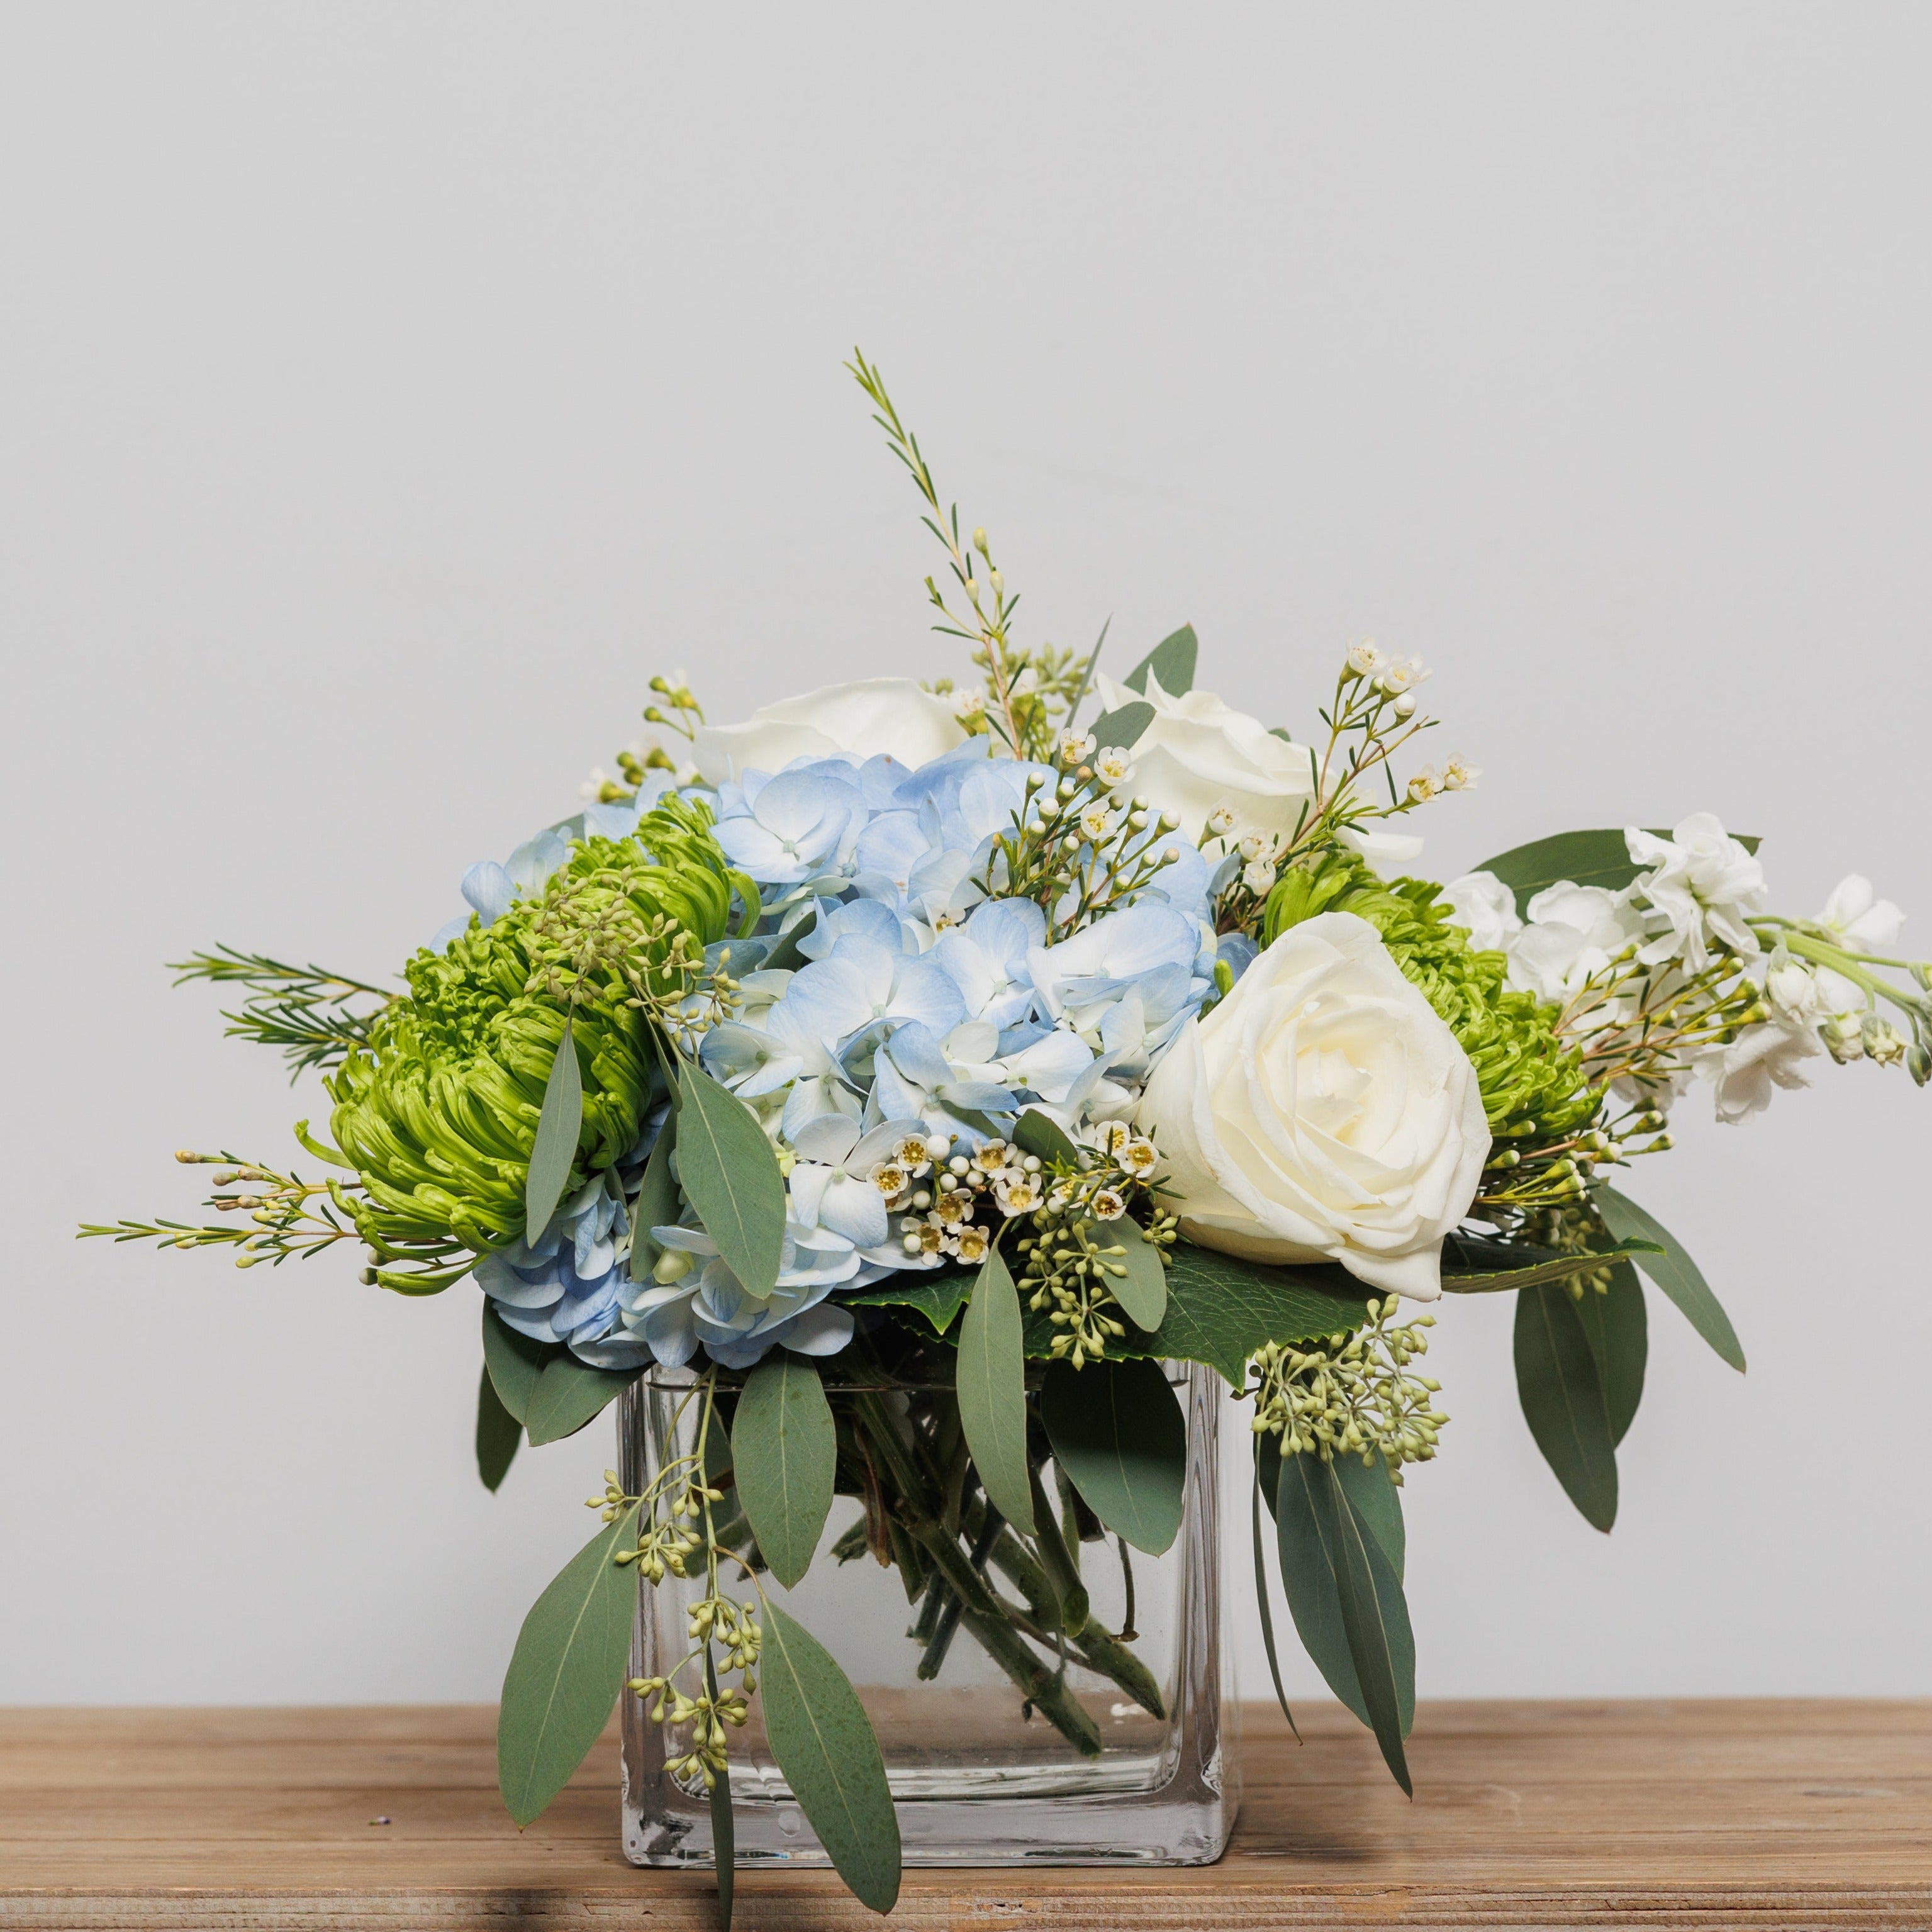 A cube arrangement with blue hydrangea, green spider mums and white roses.